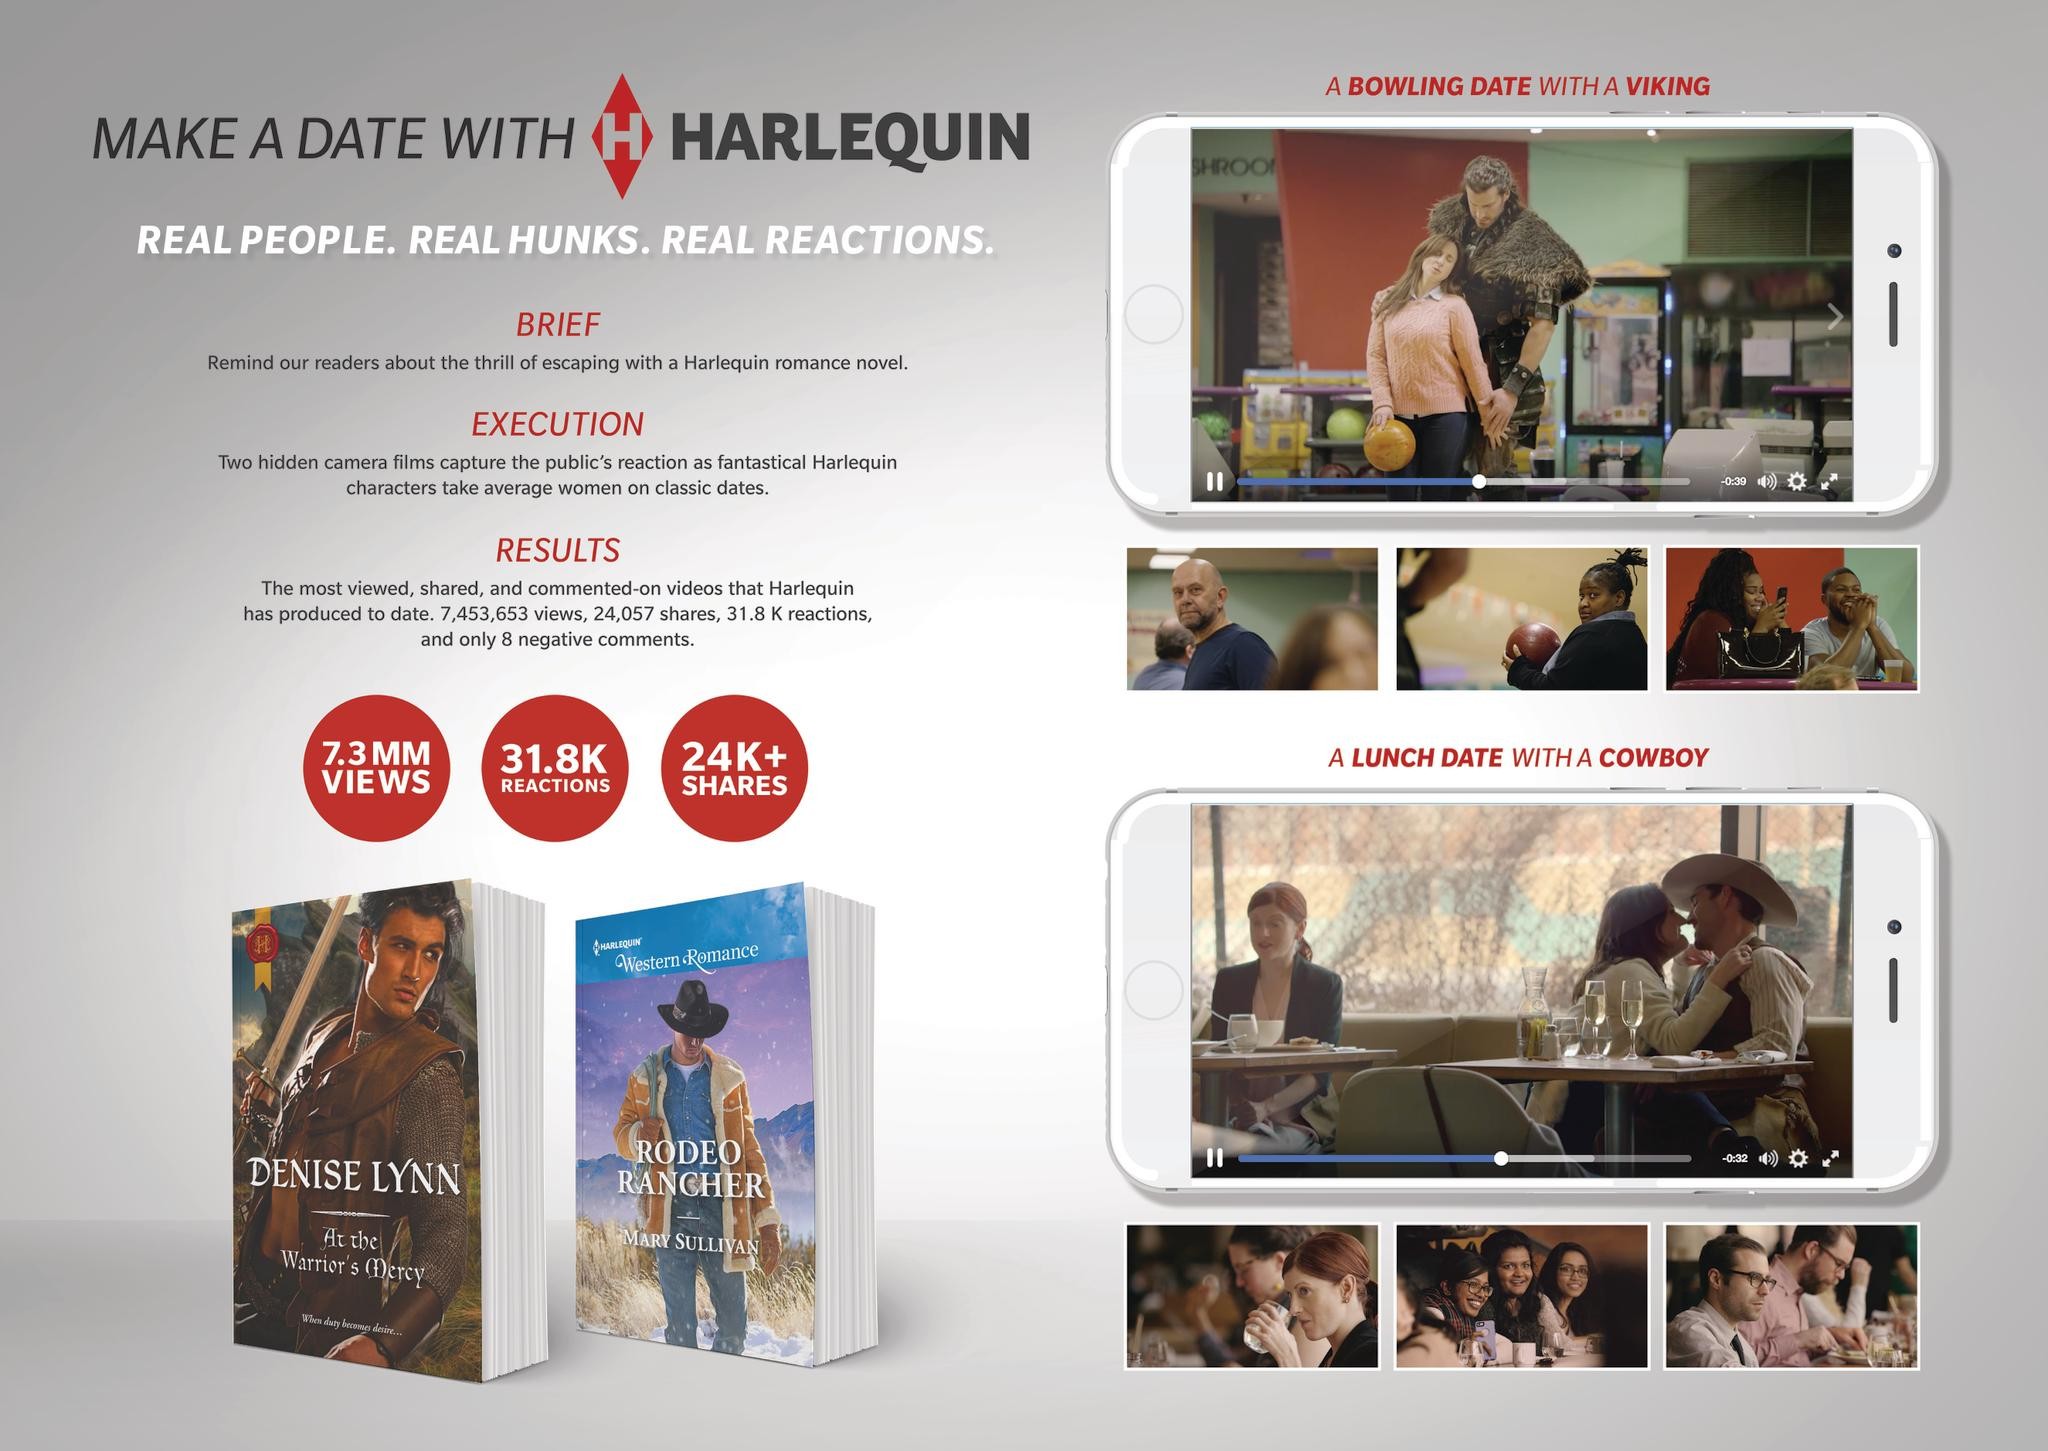 Make a Date With Harlequin